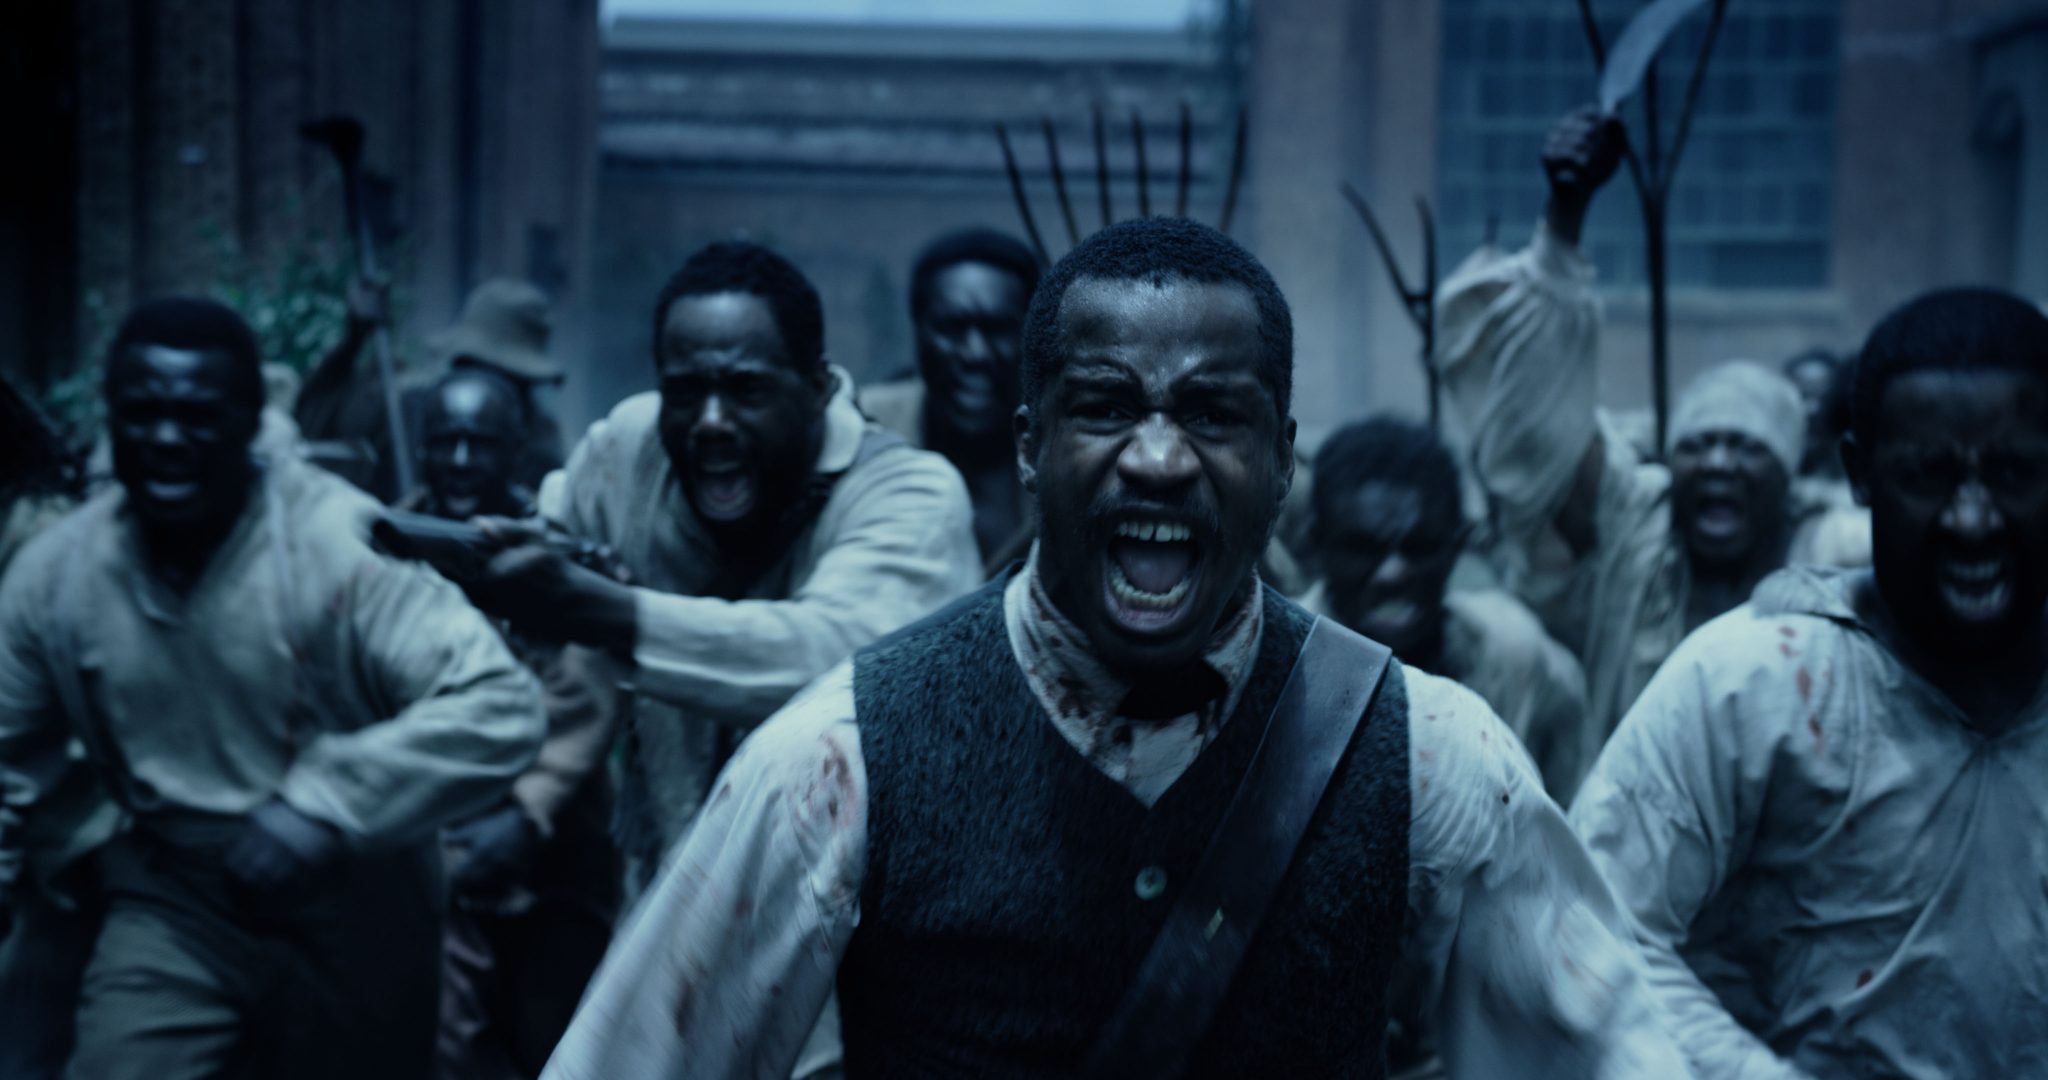 The Birth of a Nation image 2